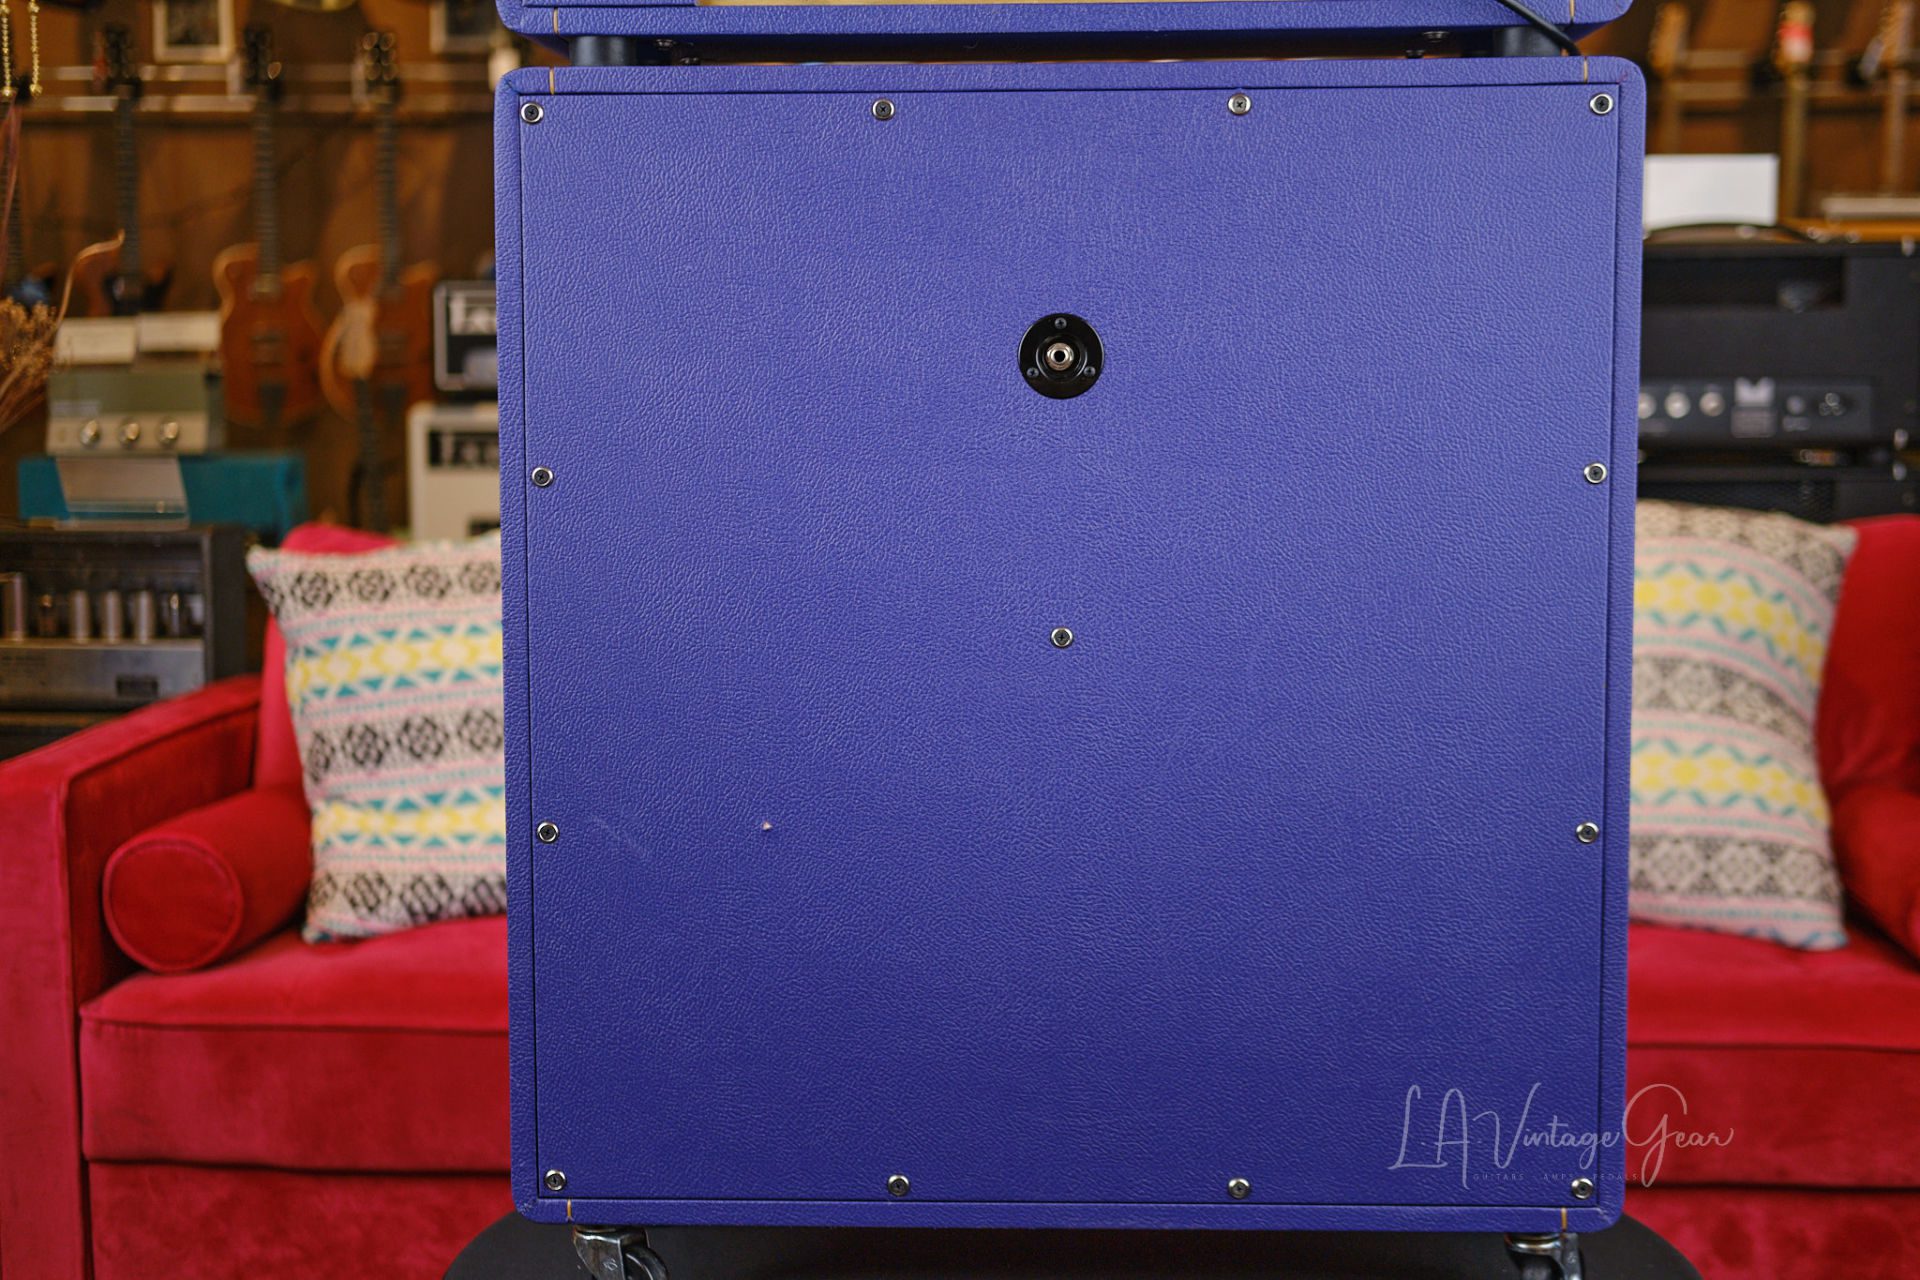 L.A. Vintage Gear Marshall Style Headshell - Purple Tolex with